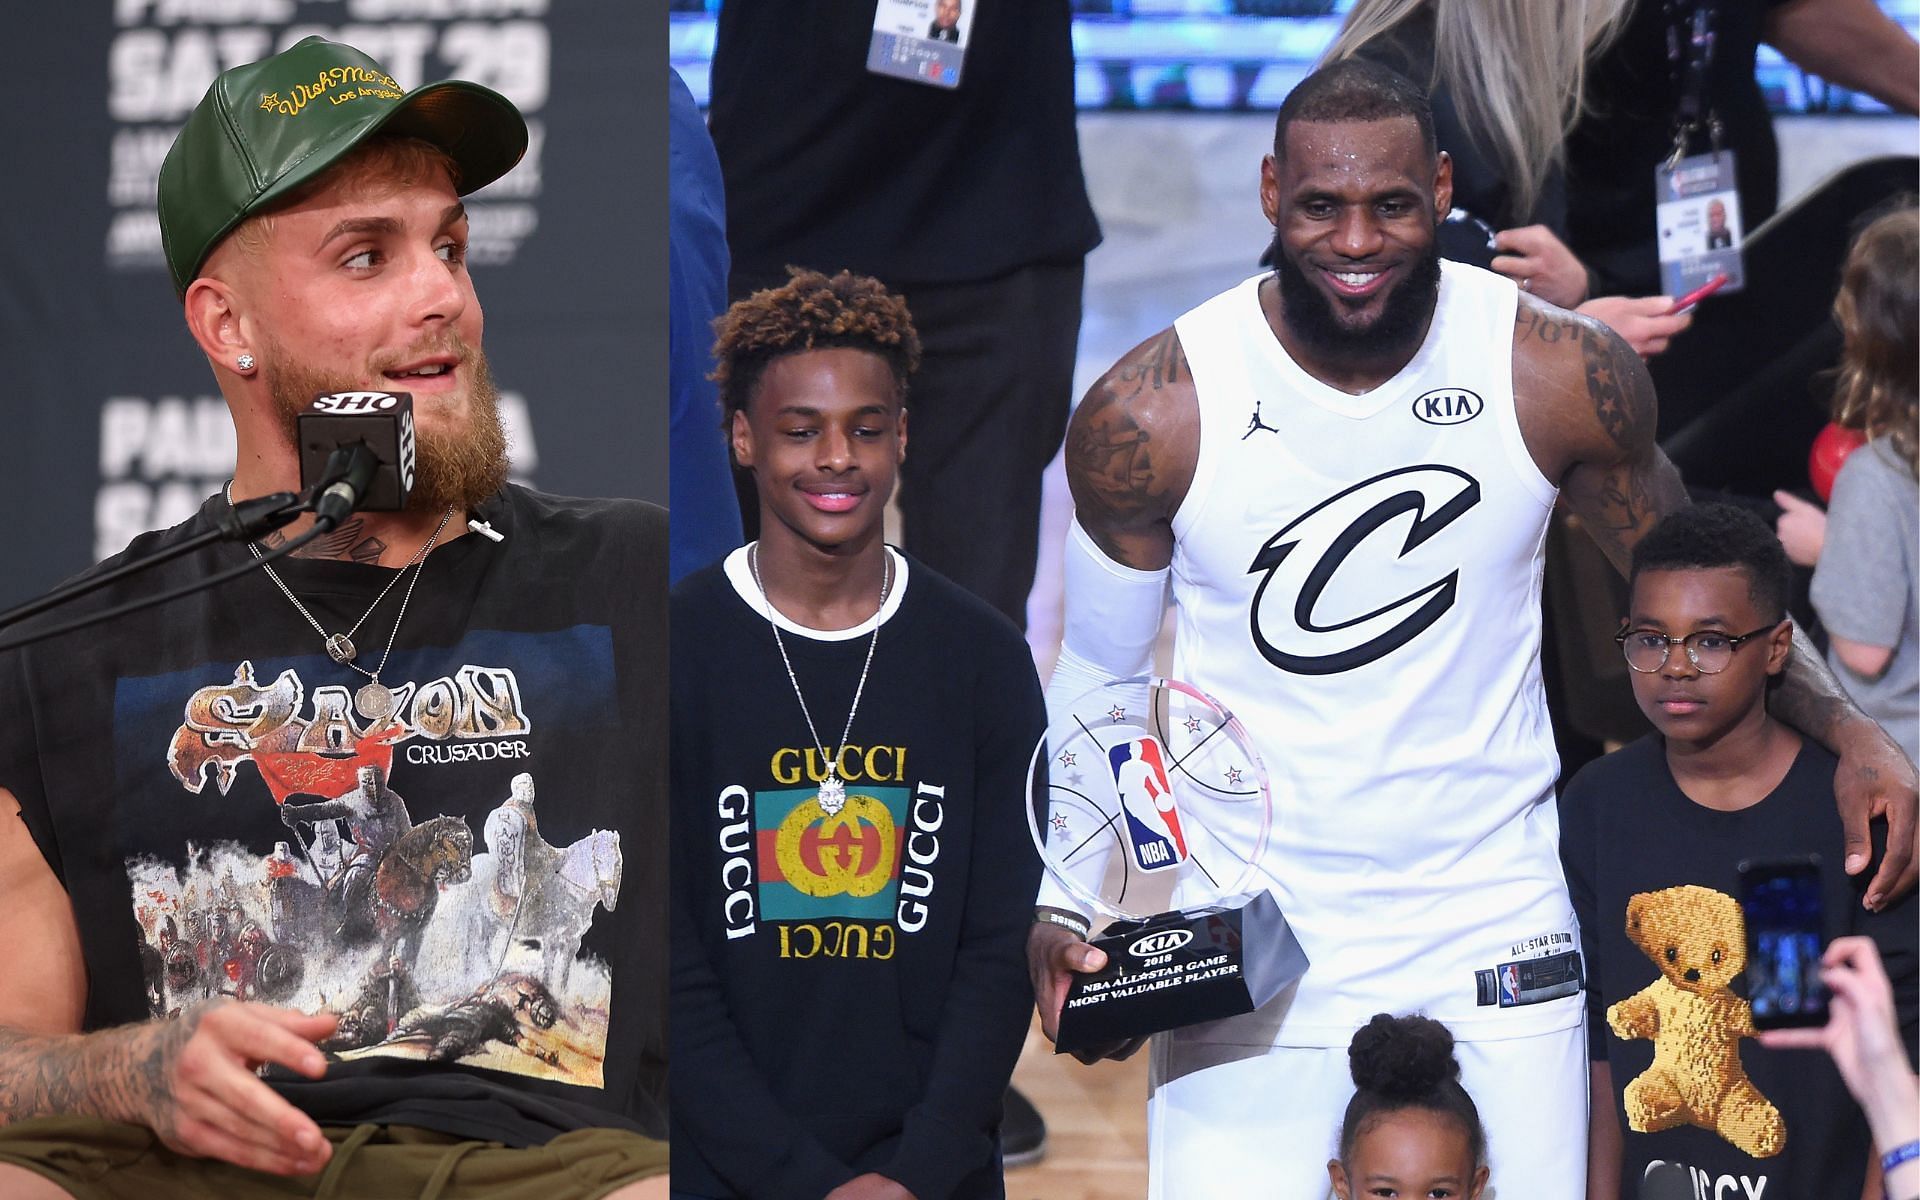 Jake Paul (left) and LeBron James with his sons Bronny James and Bryce James (right) (Image credits Getty Images)